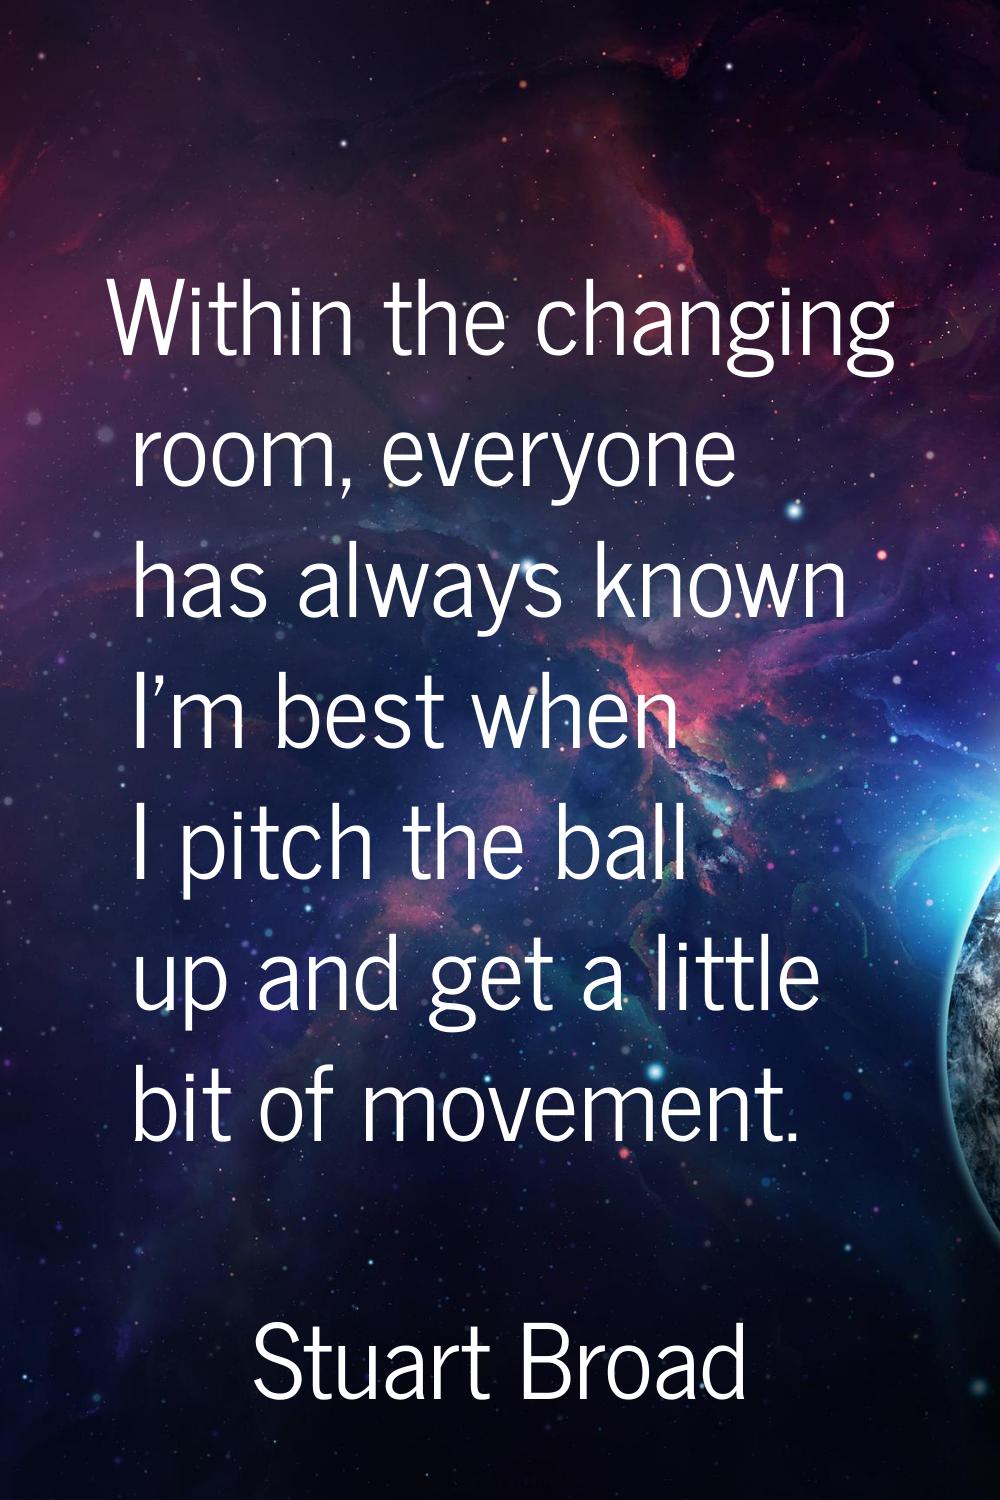 Within the changing room, everyone has always known I'm best when I pitch the ball up and get a lit